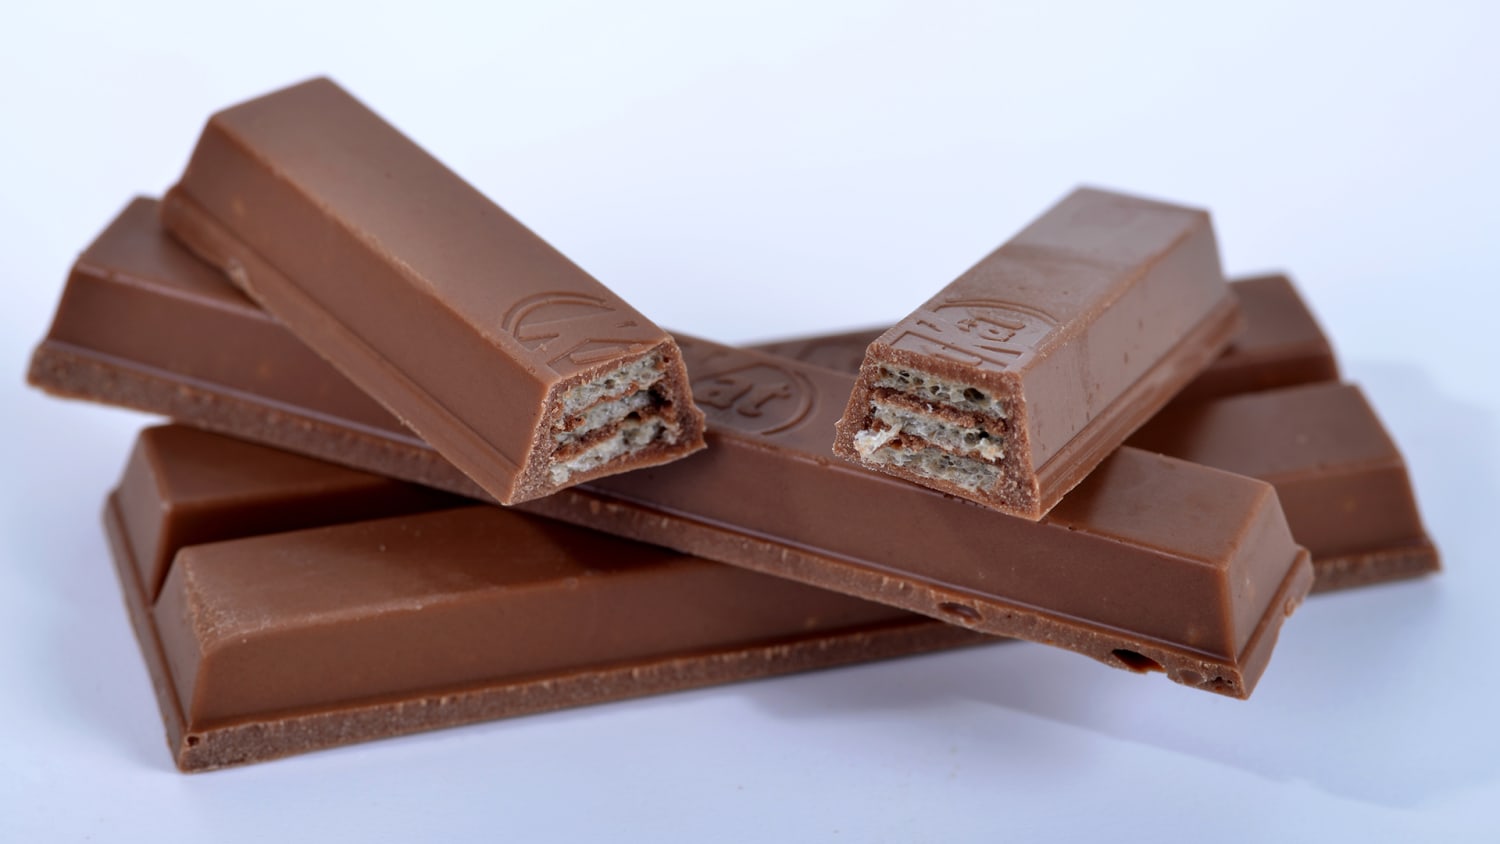 What are the Ingredients in a Kit Kat? Exploring the Chocolate Bar's Recipe